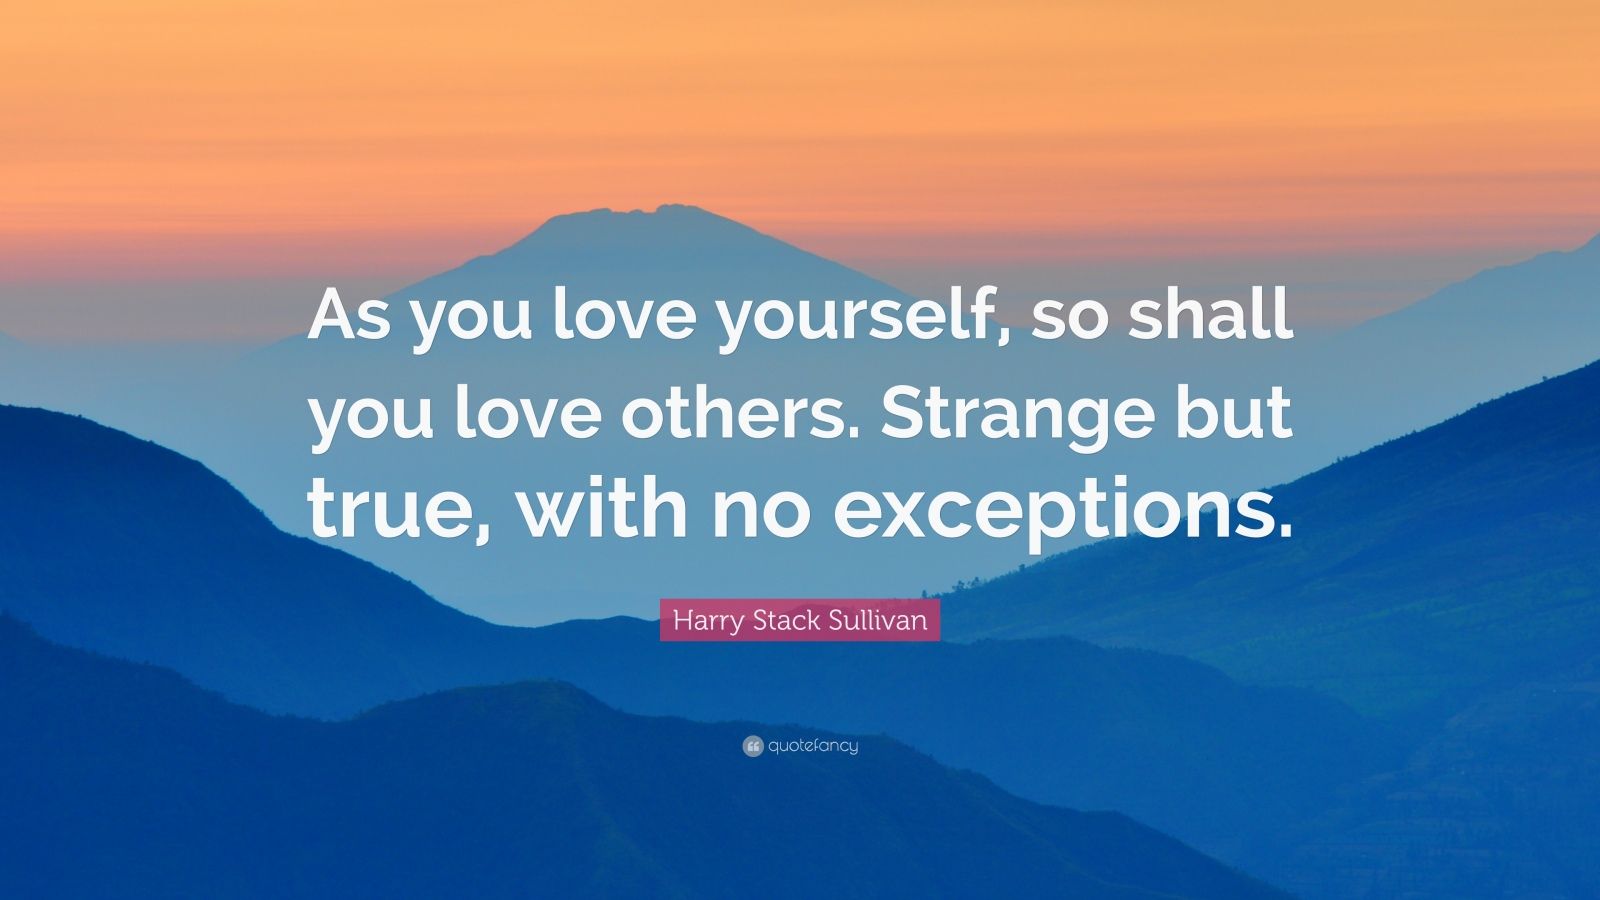 Harry Stack Sullivan Quote: “As you love yourself, so shall you love